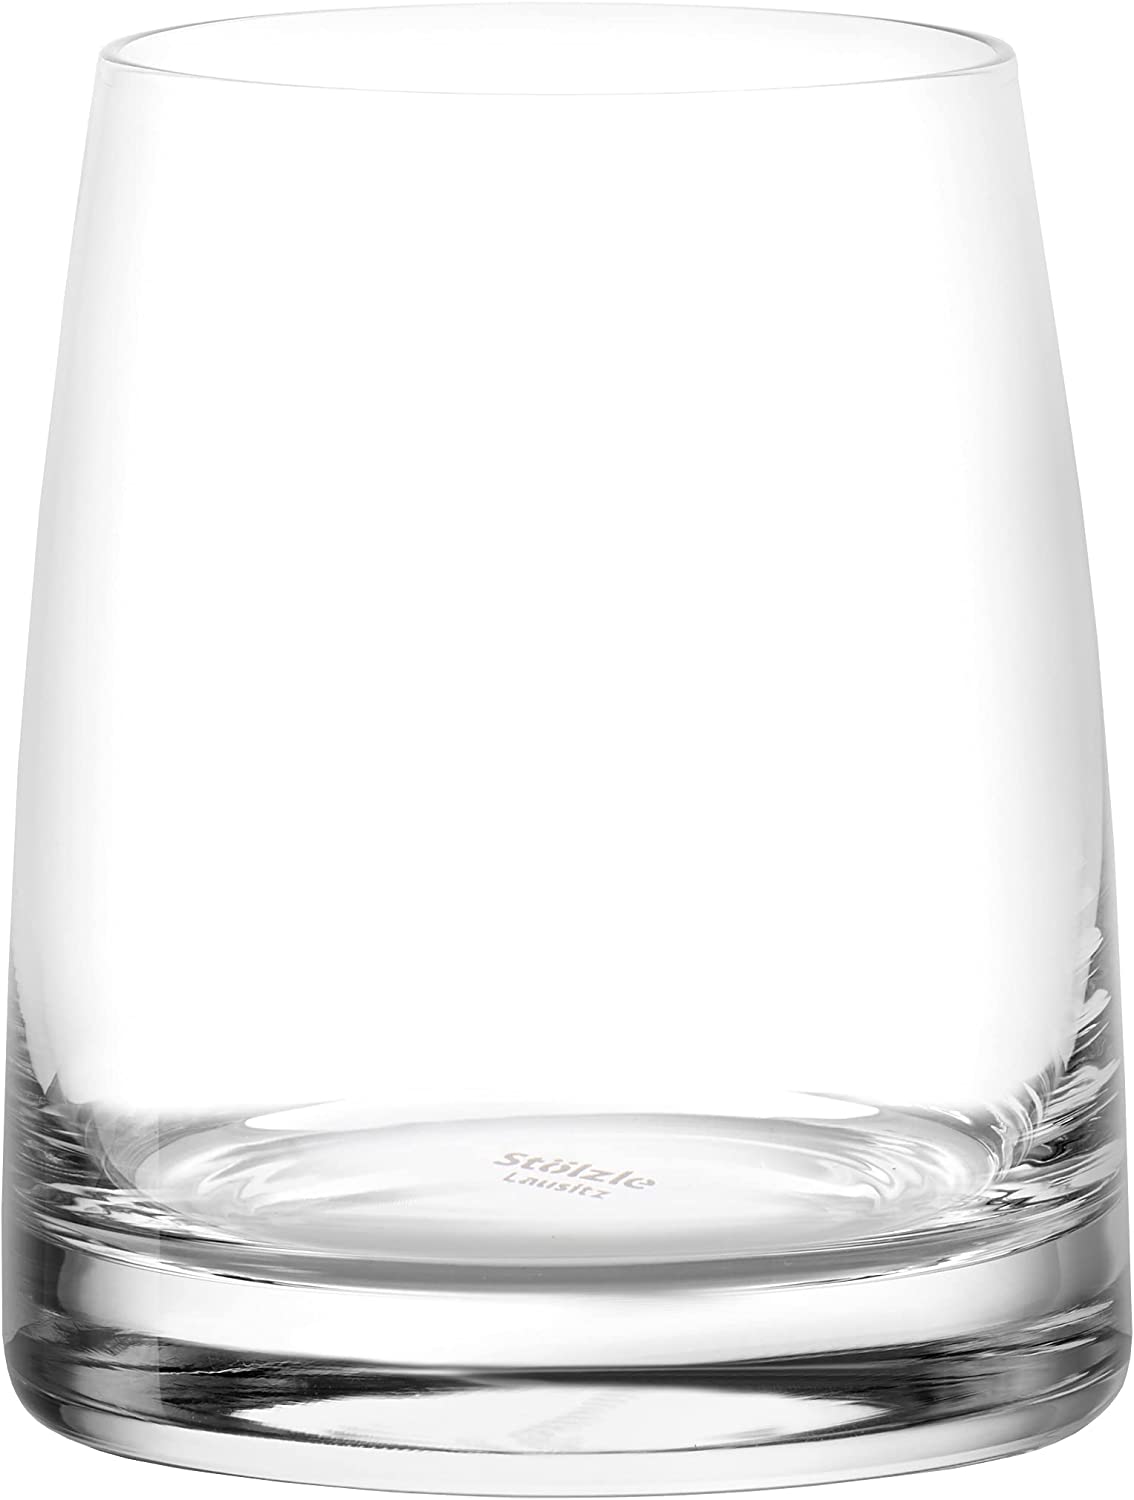 Stölzle Lausitz Highball Glasses 255 ml I Drinking Glasses Small Set of 6 from the Experience Series I Slim Crystal Glasses Dishwasher Safe as Water Glasses Juice Glasses Long Drink Glasses Gin Glasses